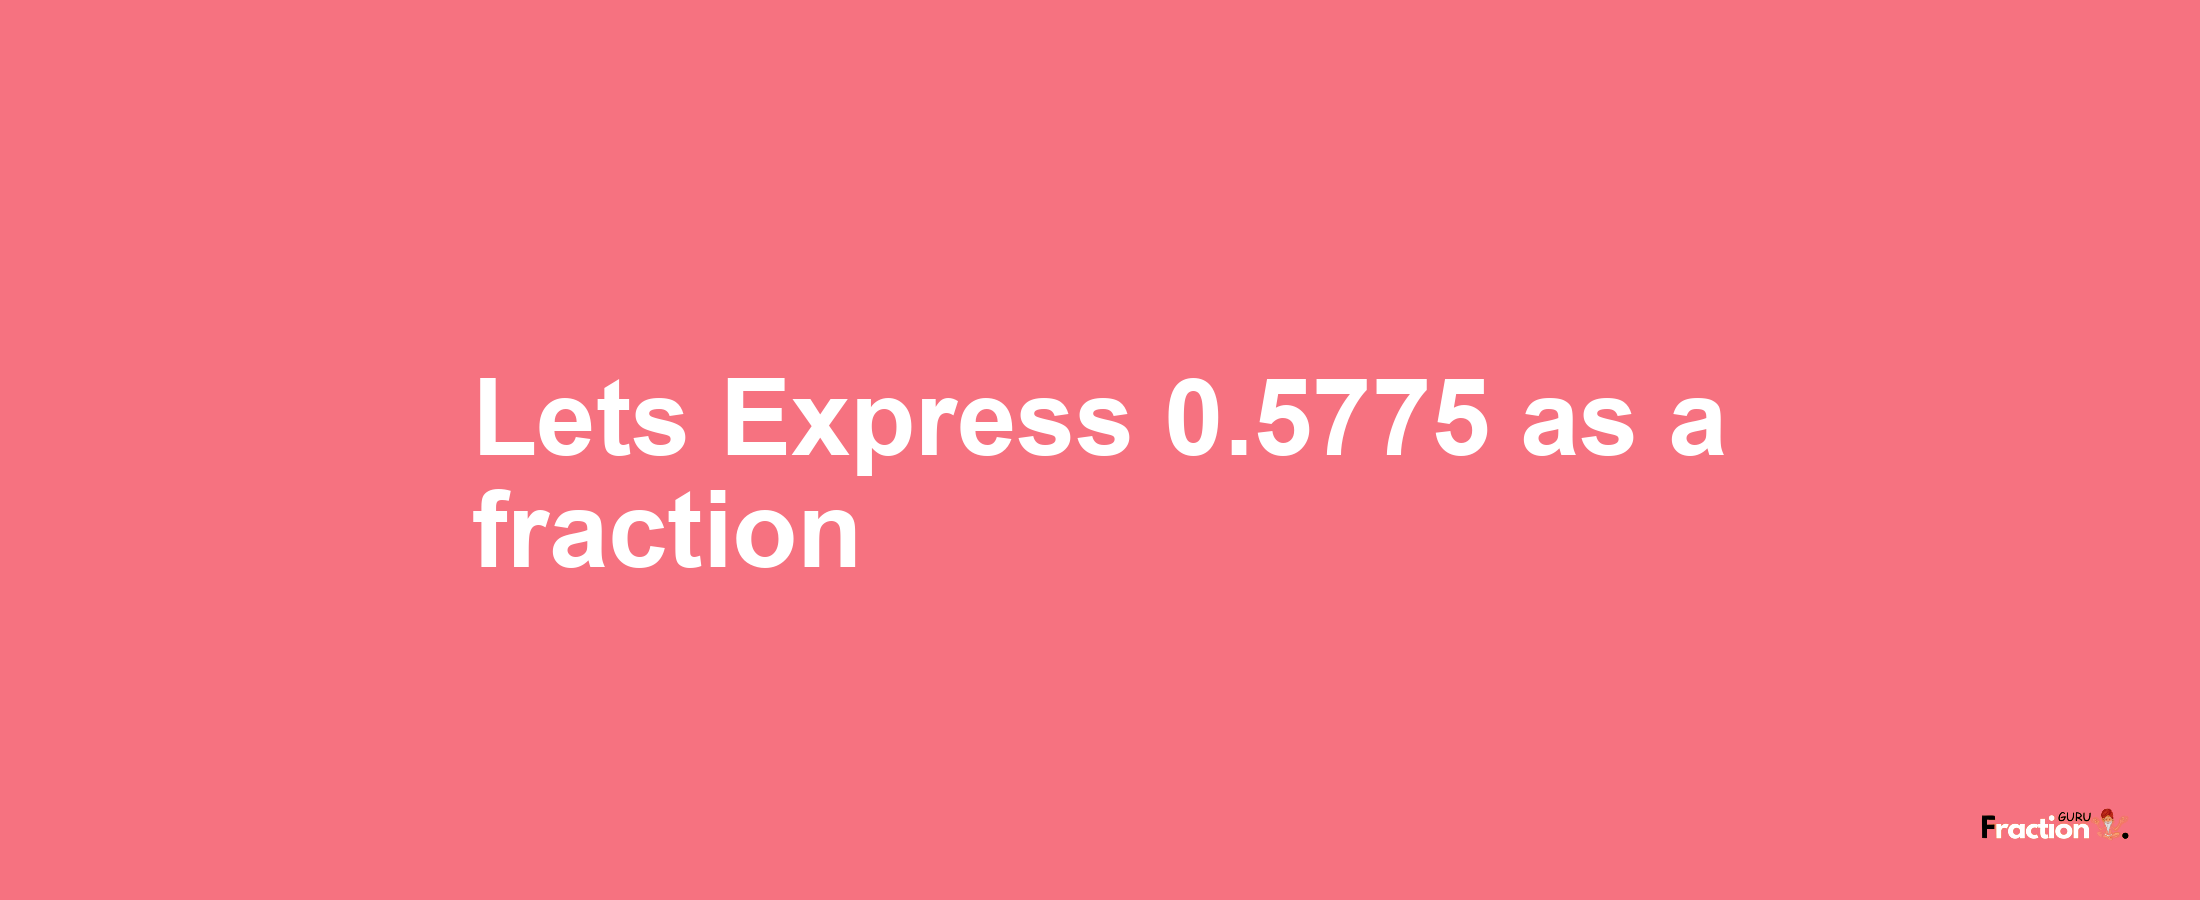 Lets Express 0.5775 as afraction